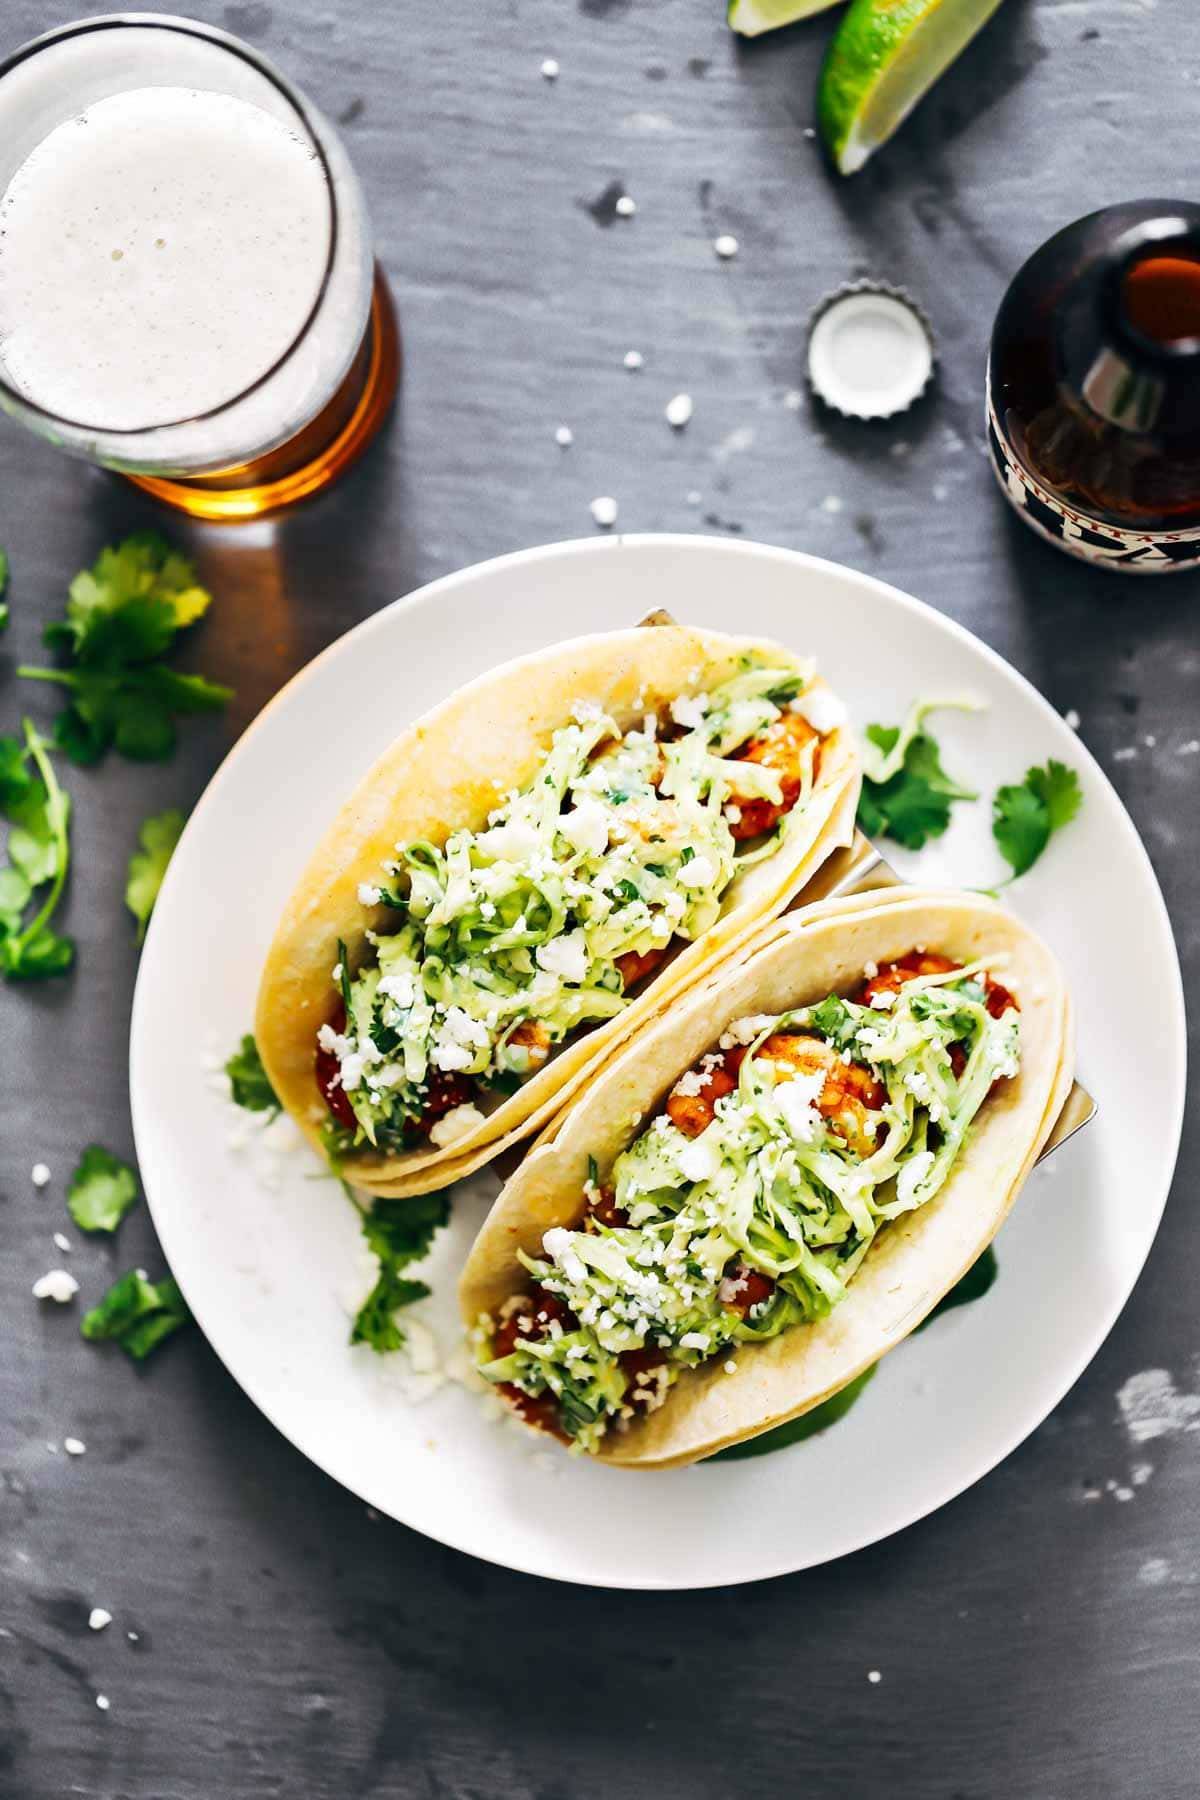 Spicy Shrimp Tacos with Garlic Cilantro Lime Slaw - ready in 30 minutes and loaded with avocado, spicy shrimp, and a homemade creamy lime slaw.  HELLO YUMMY!